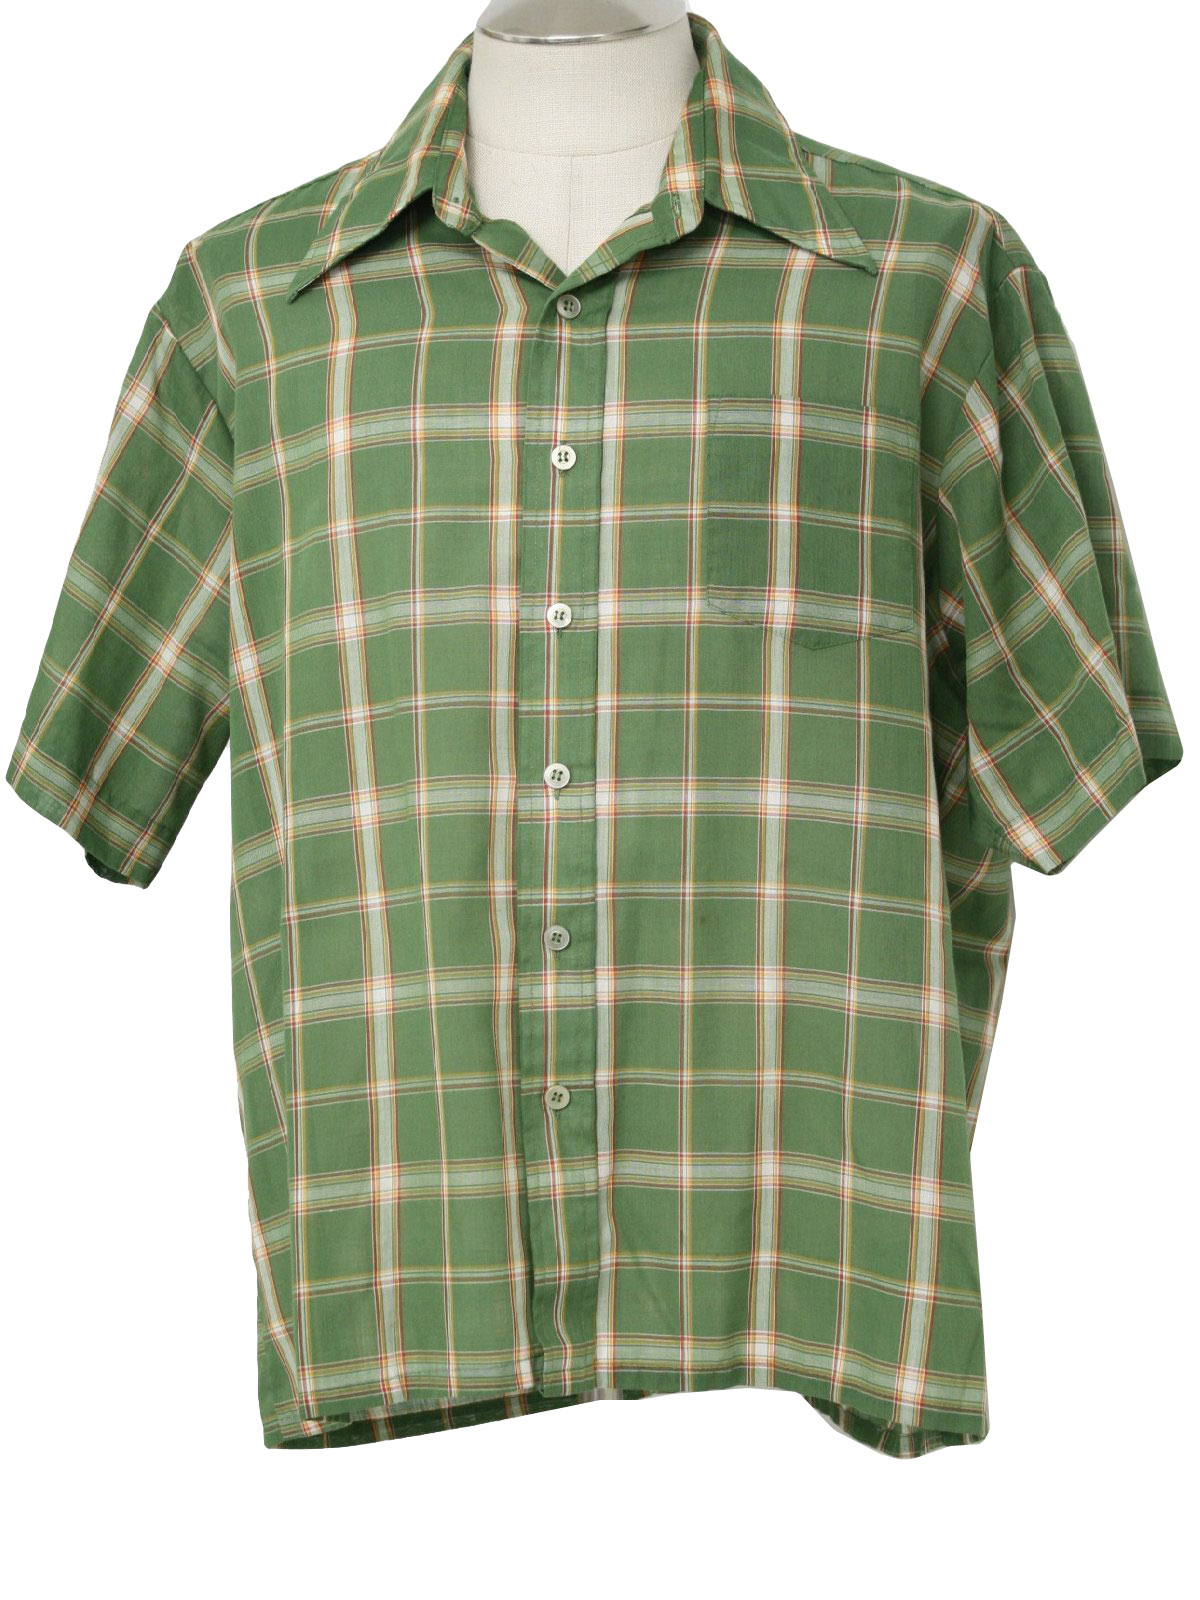 70's Vintage Shirt: 70s -JC Penney- Mens olive green, white, yellow ...